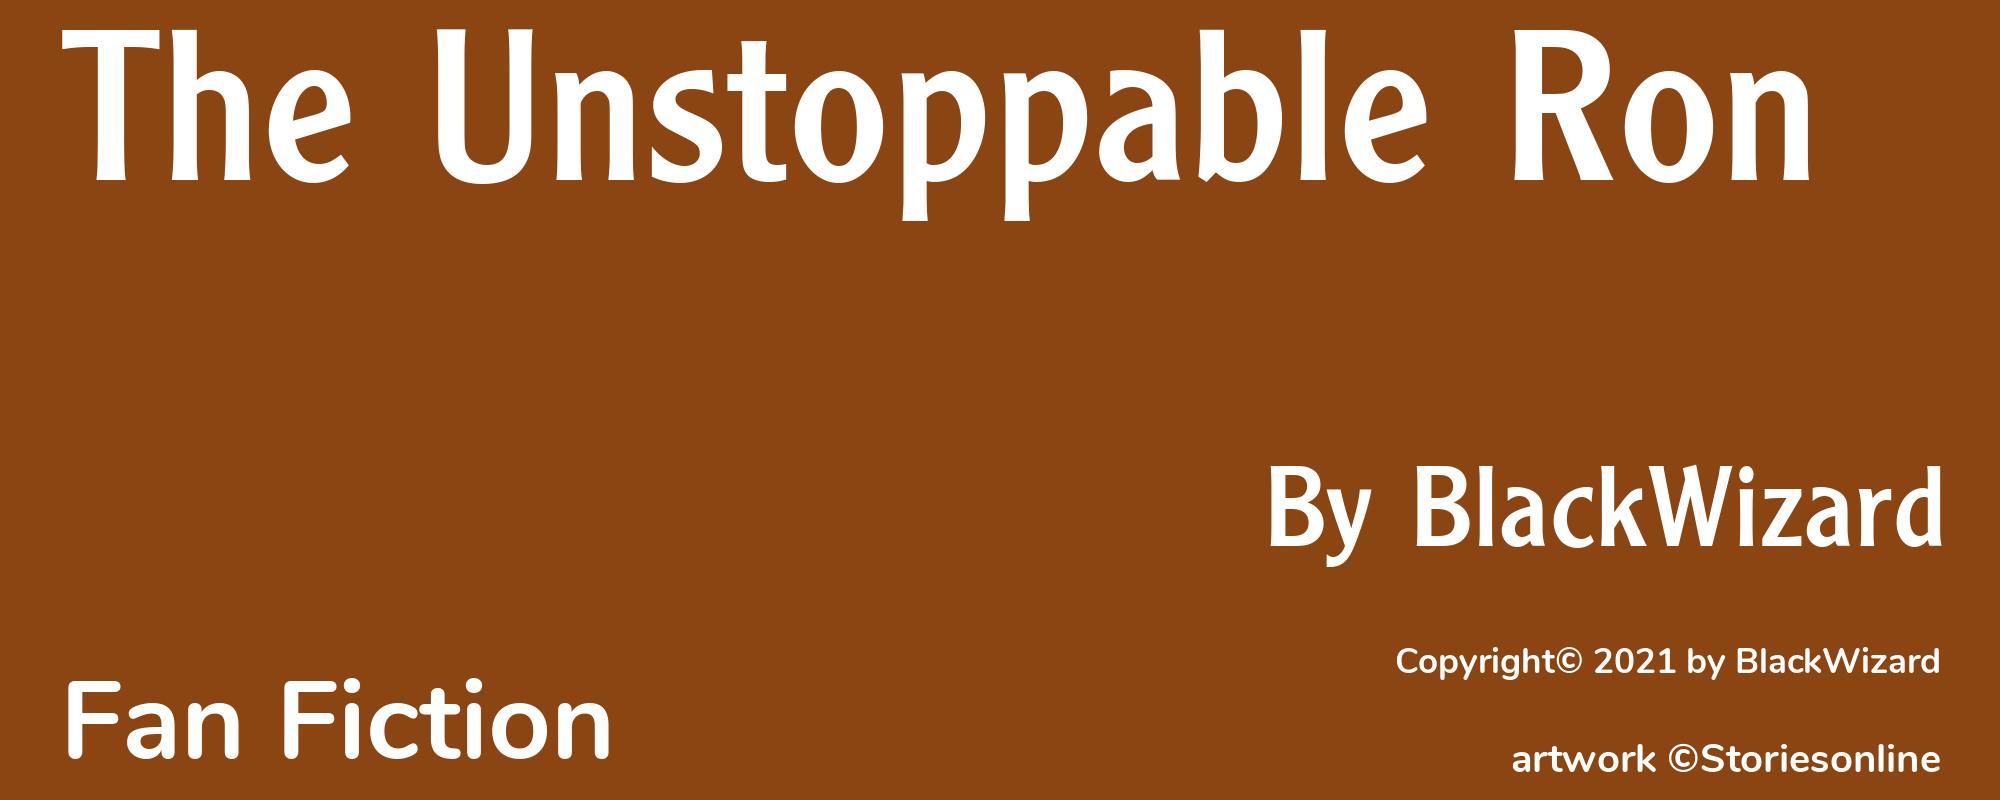 The Unstoppable Ron - Cover